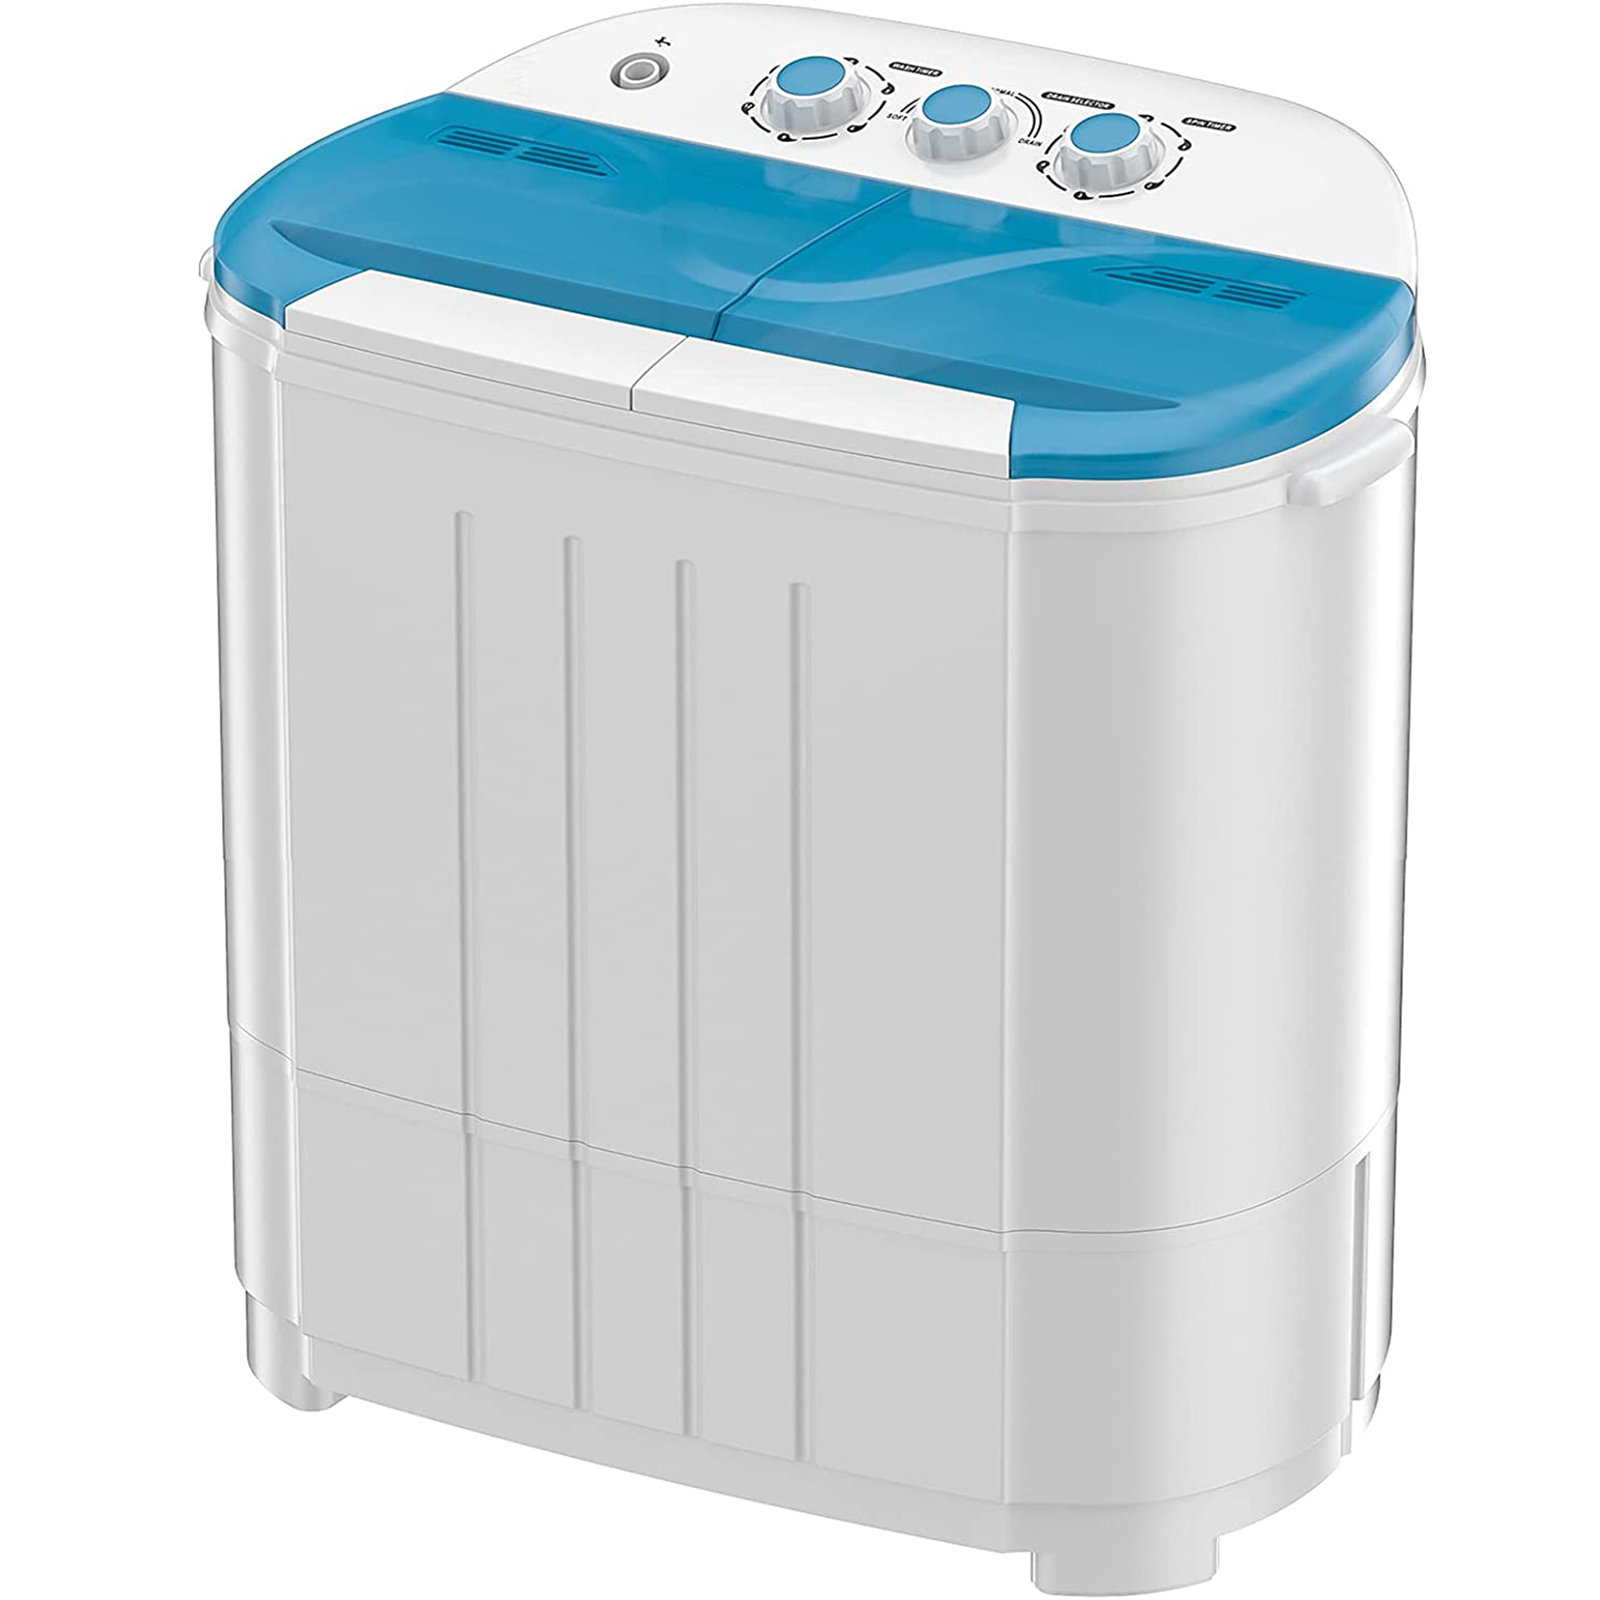 Auertech Portable Washer & Dryer Combo in White & Reviews